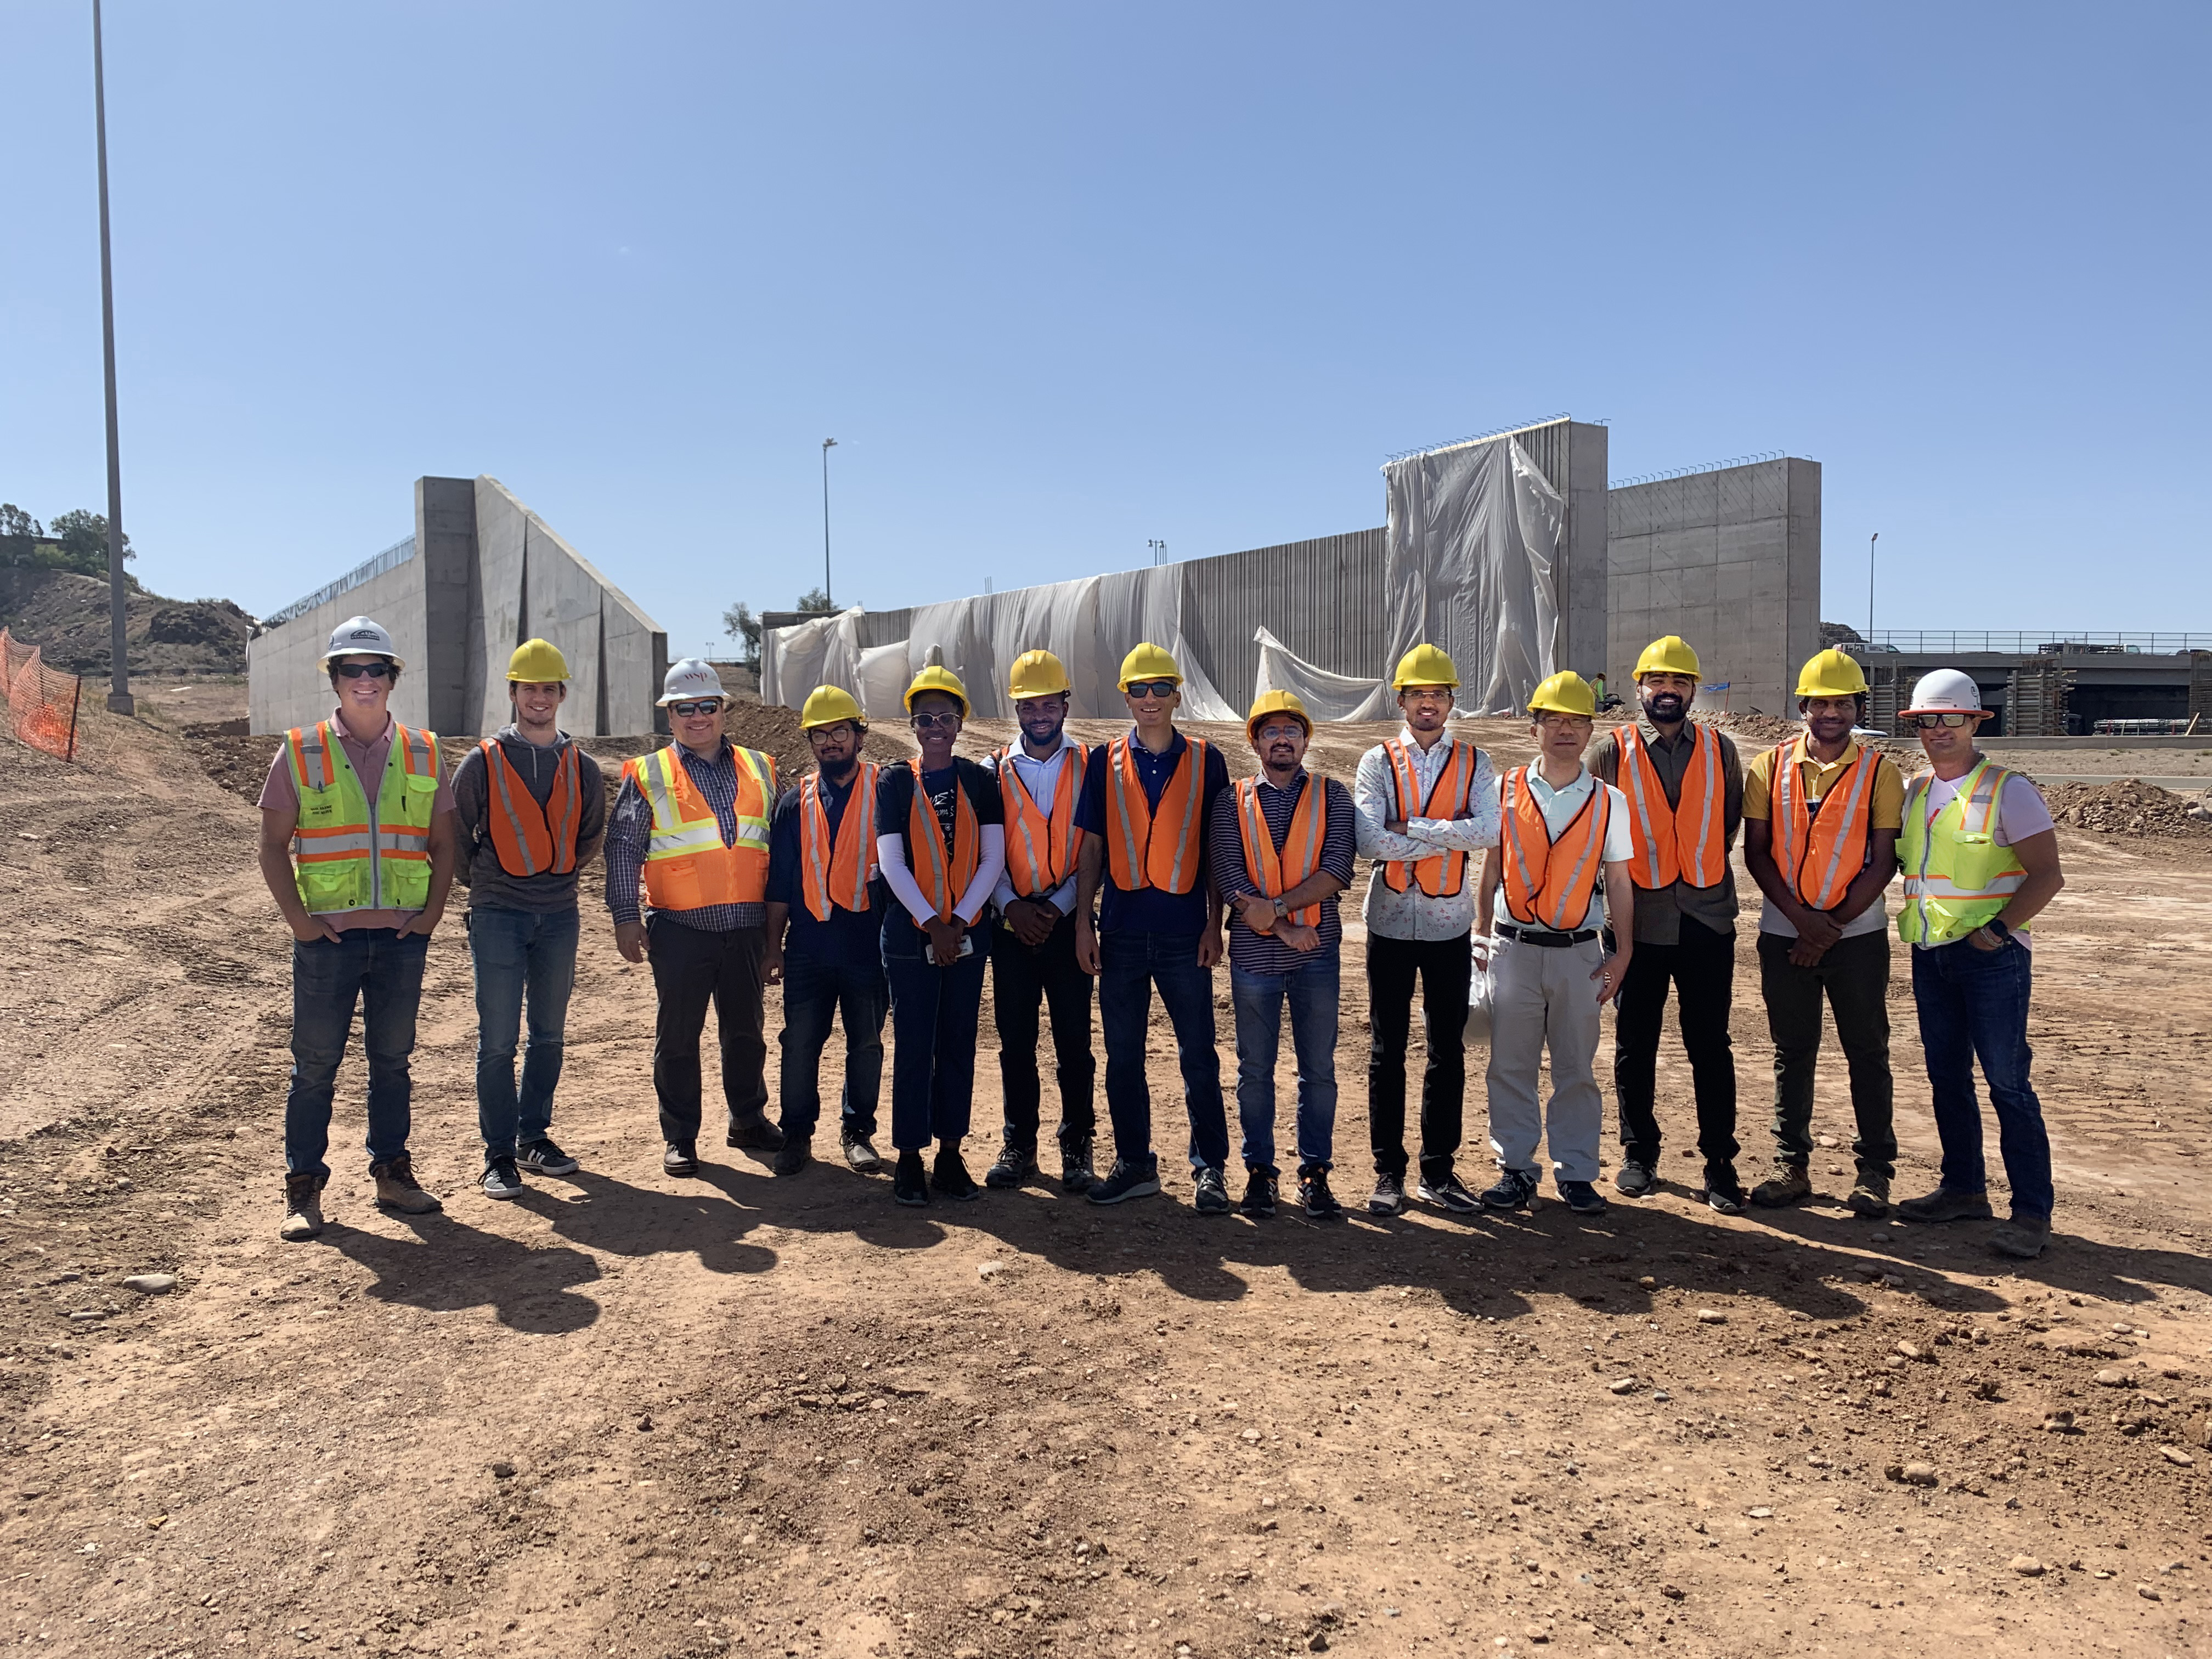 Thirteen people standing in construction safety gear